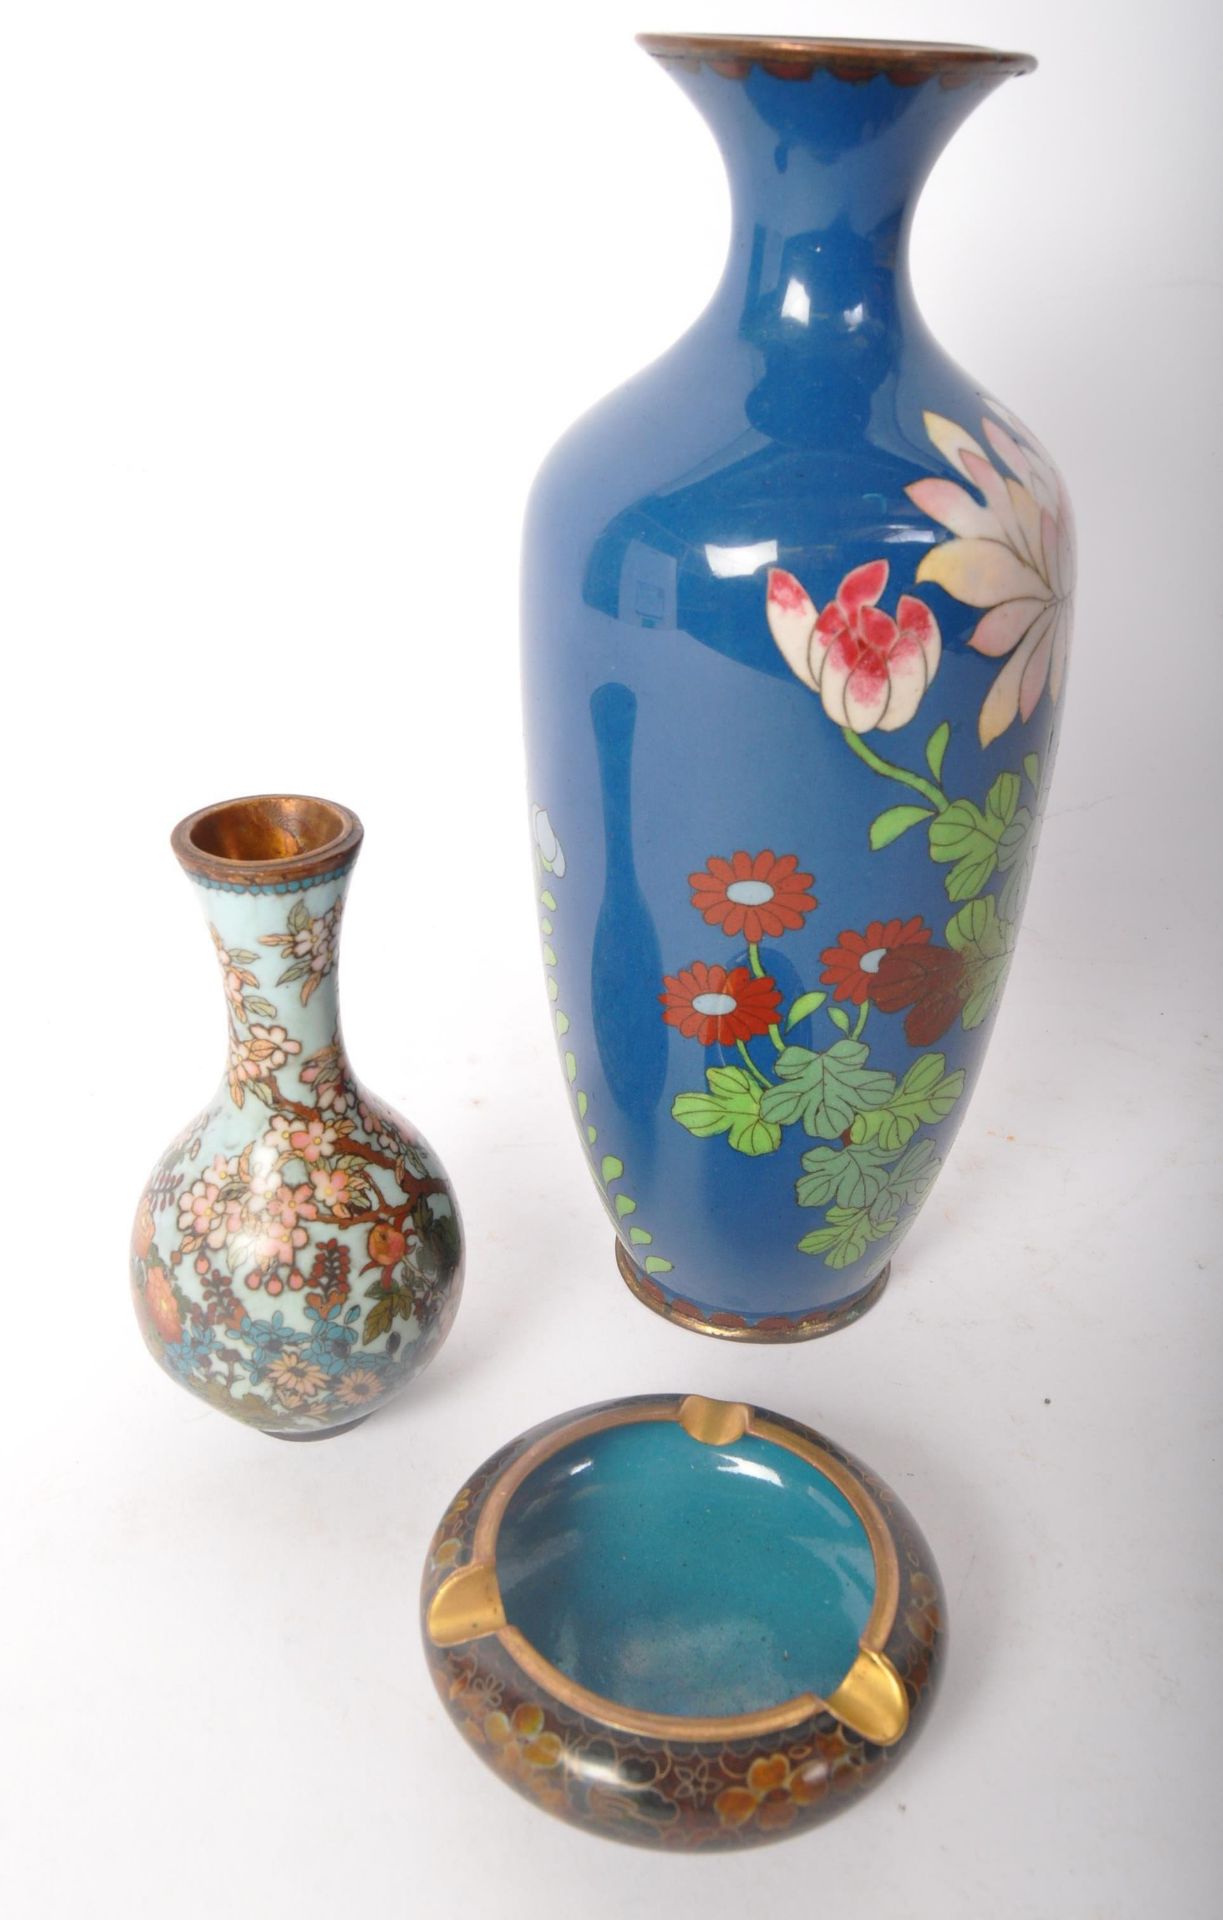 COLLECTION OF 20TH CENTURY CLOISONNE ITEMS